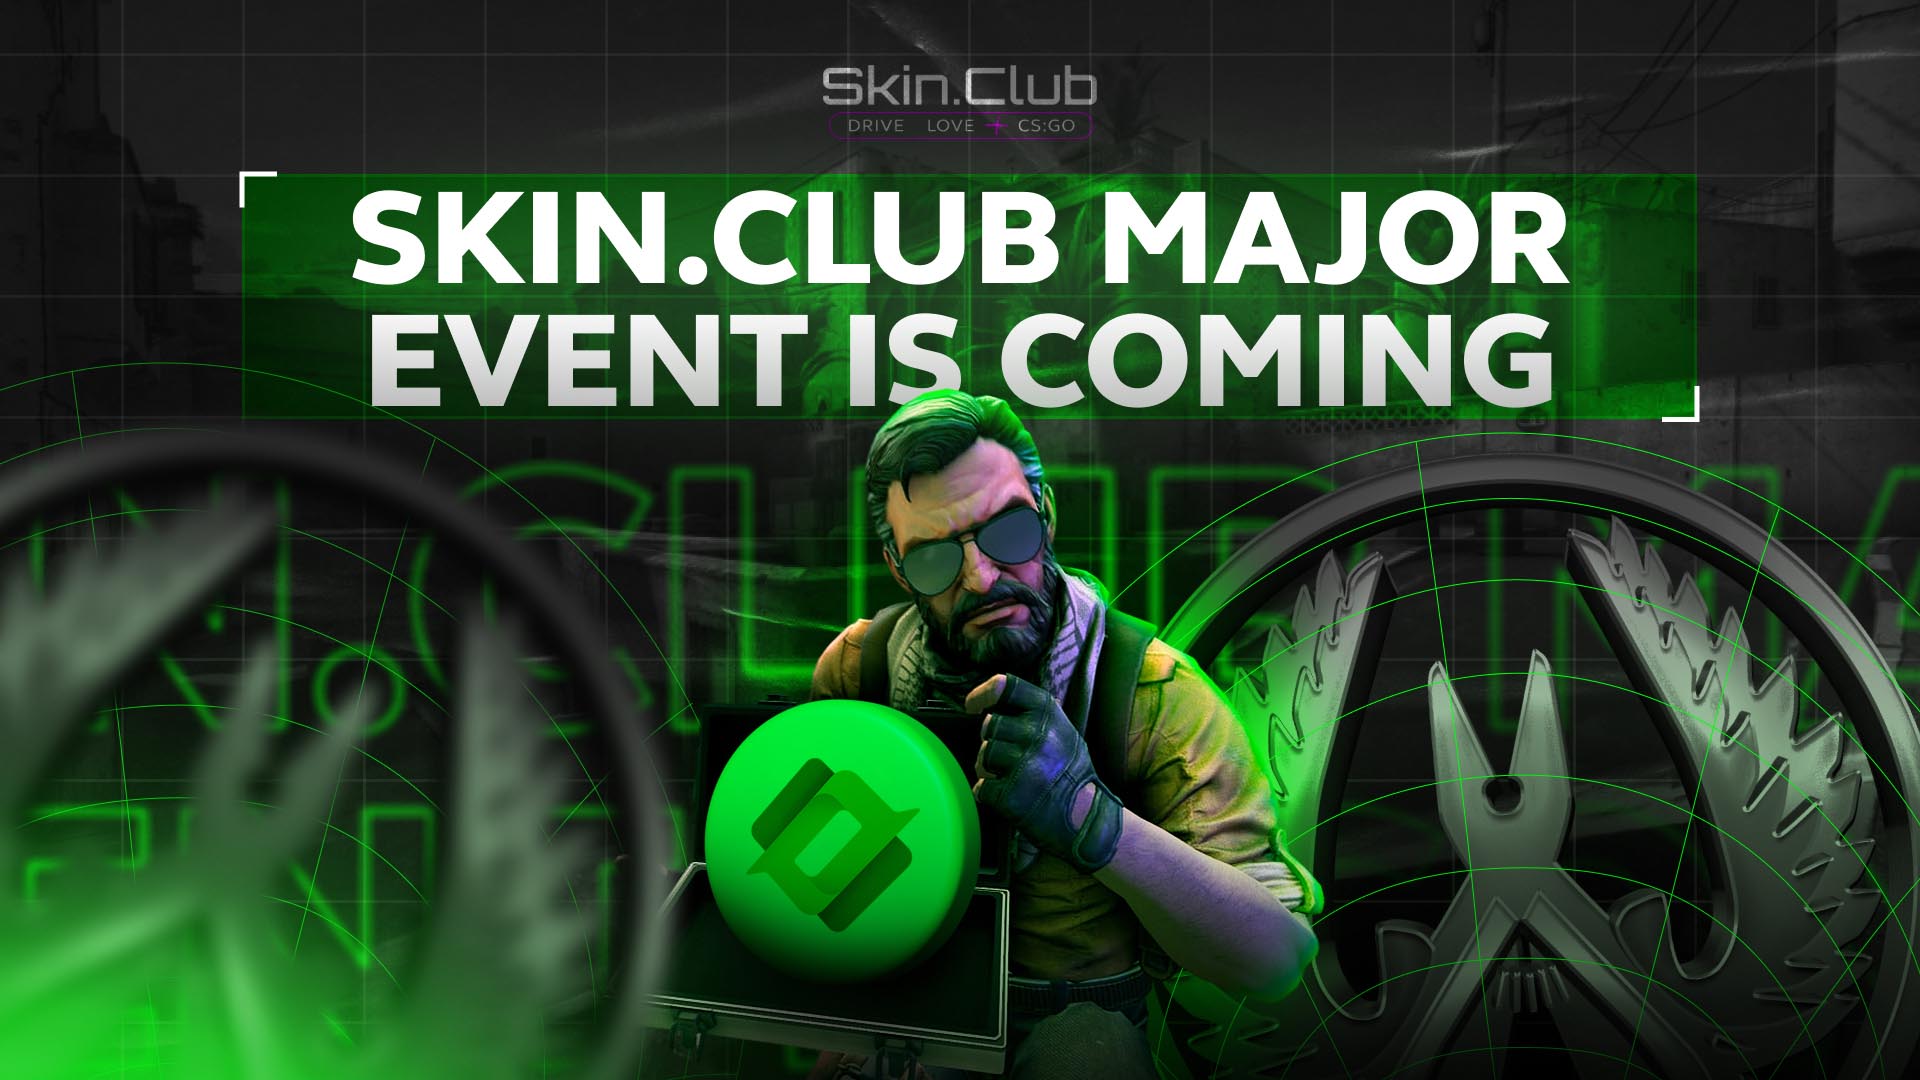 Skin.Club Major Event is coming!